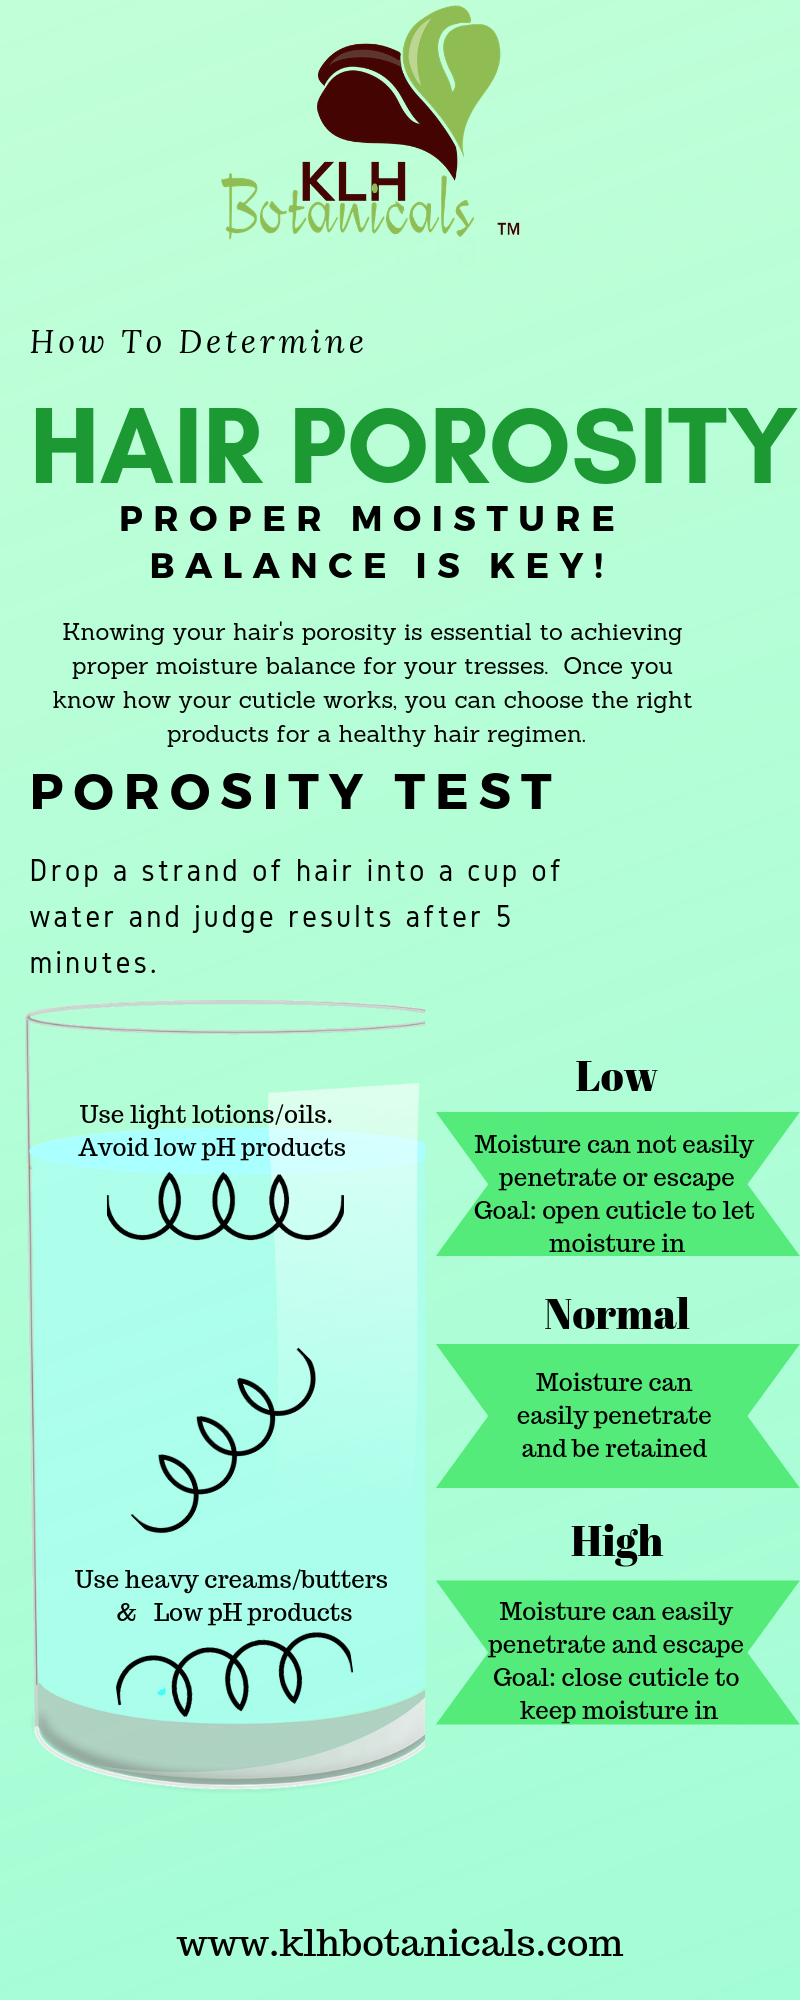 Hair Porosity and Why It's Important